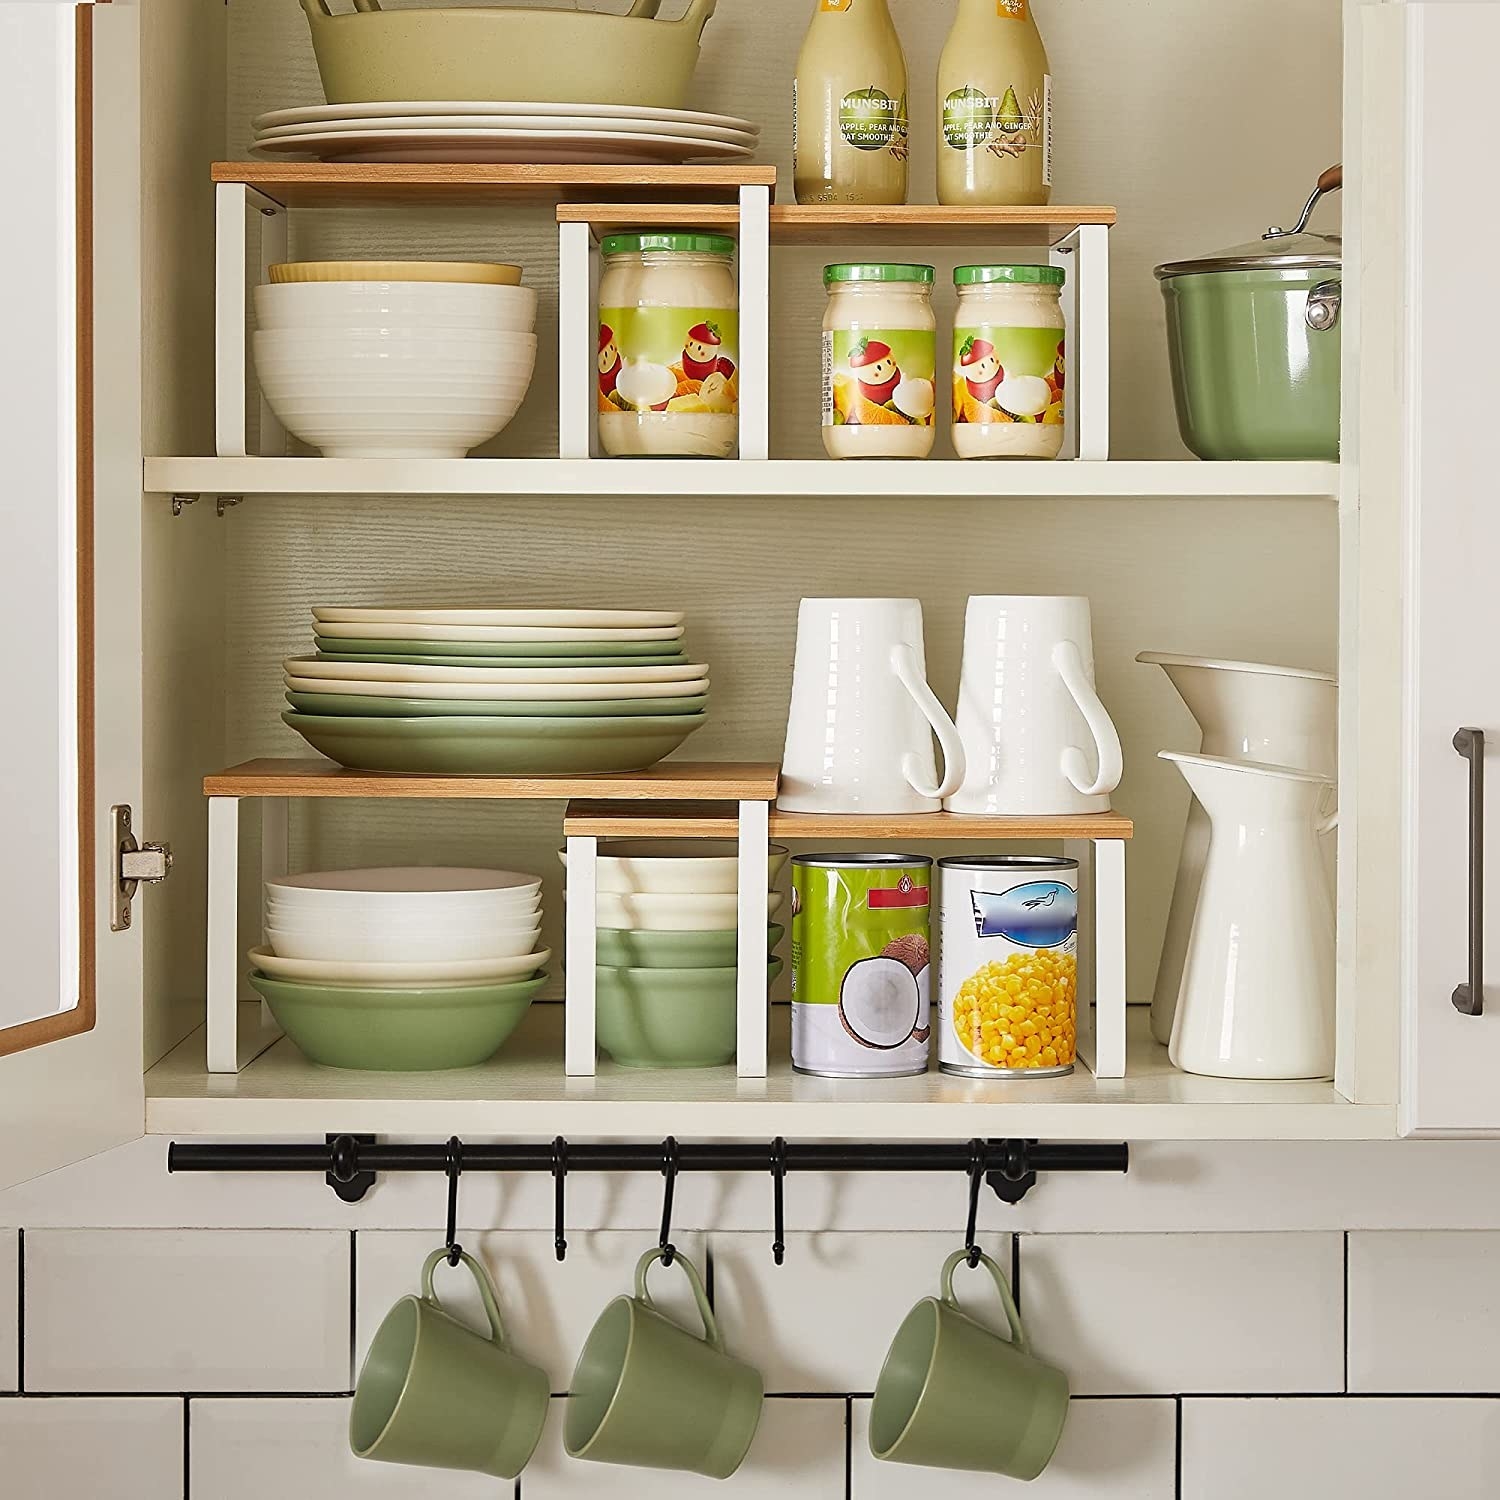 25 Storage Solutions For Anyone With Kitchen Cabinets Screaming “Help”